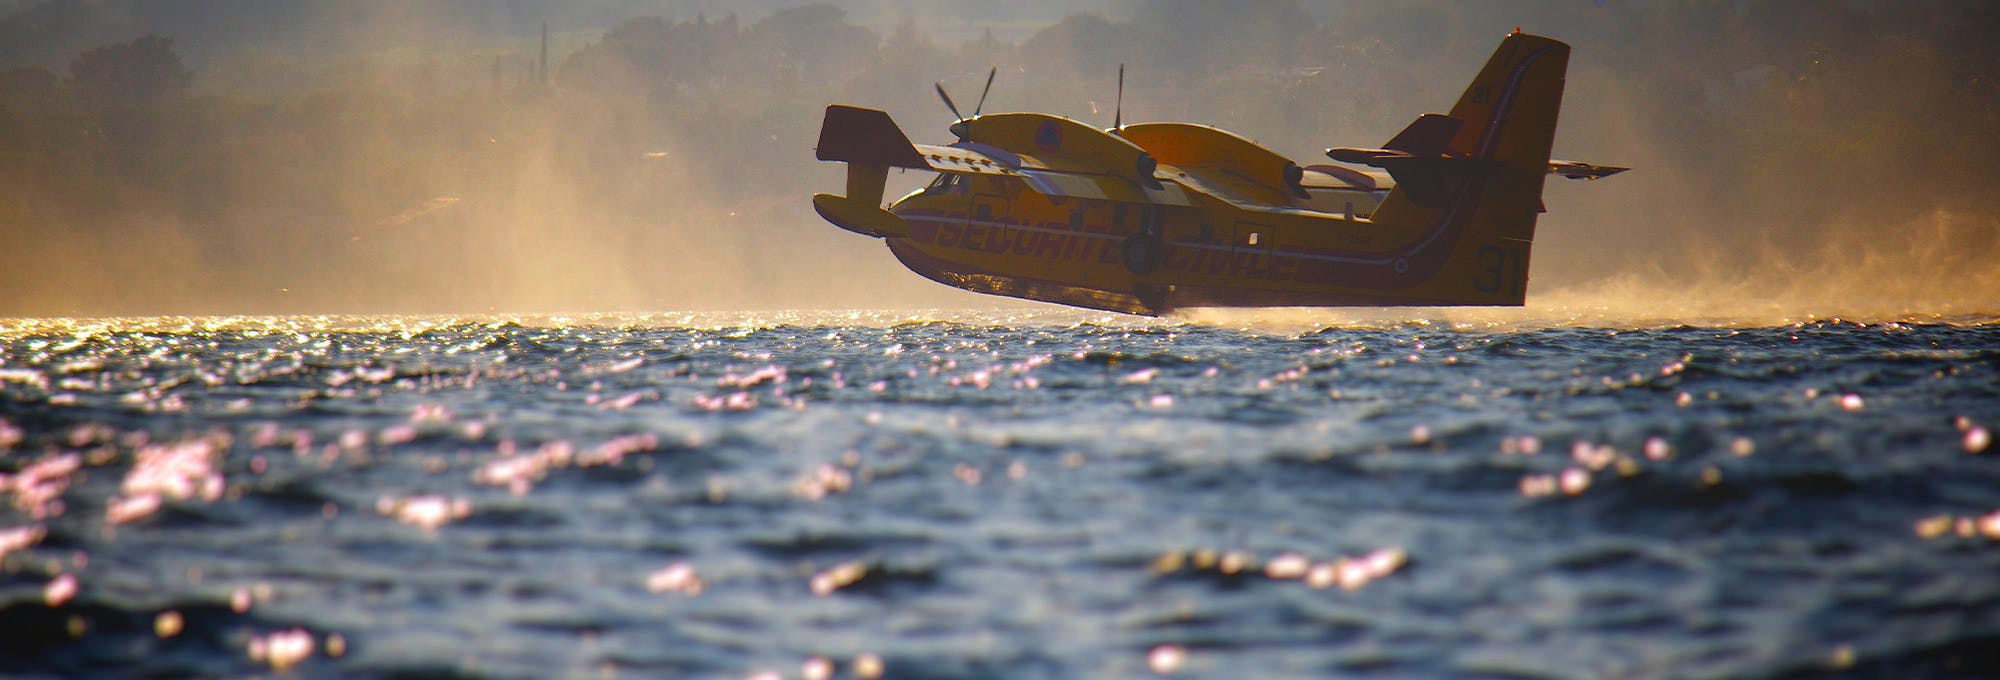 A sea plane flying right over the surface of water which represents the fundamental theorem of calculus